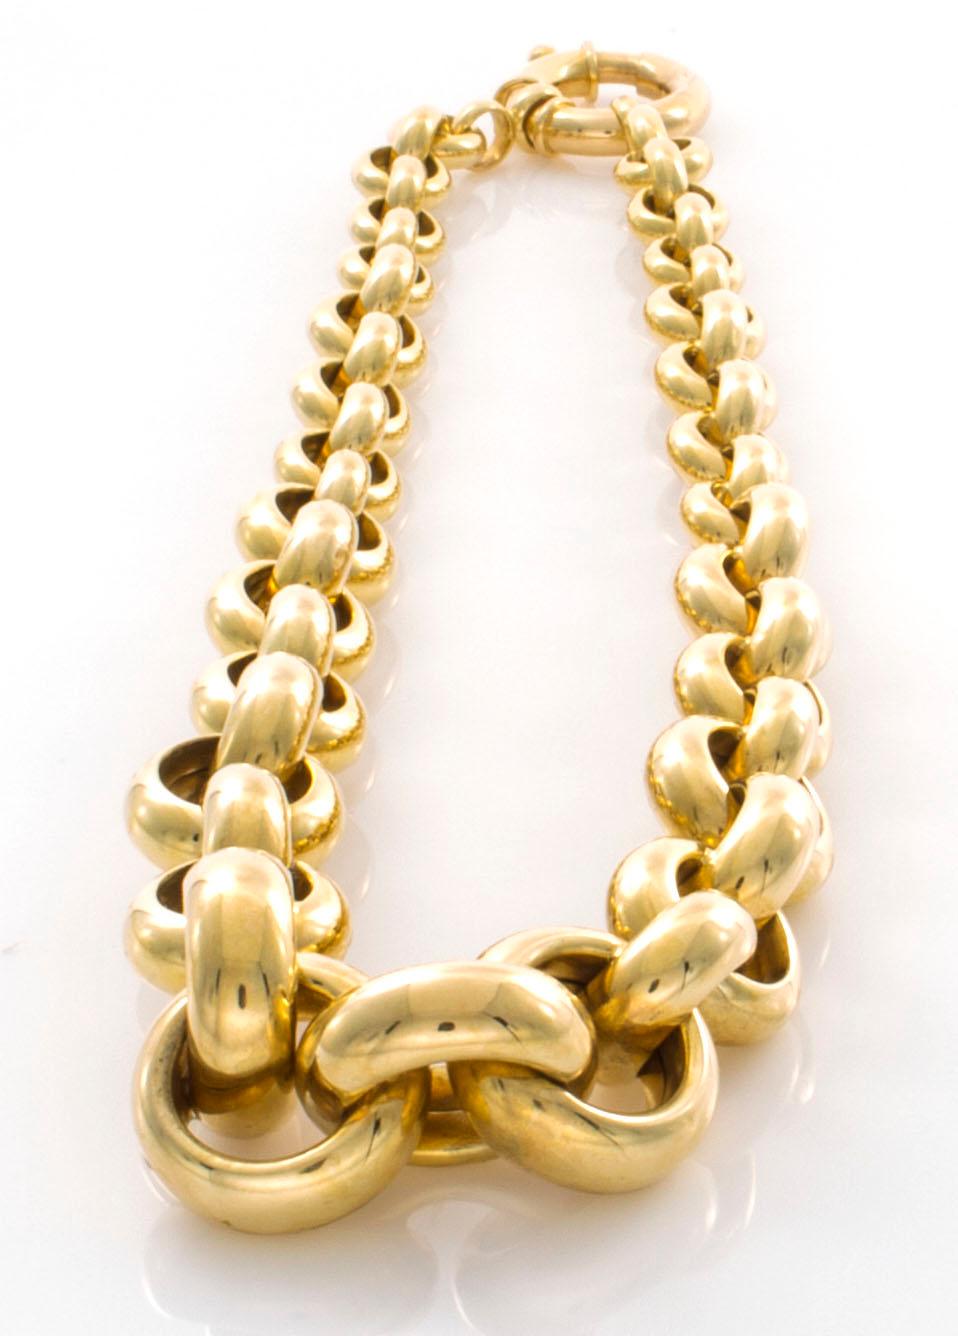 14 Karat Yellow Gold Tapered Circle Link Necklace In Excellent Condition For Sale In Mobile, AL